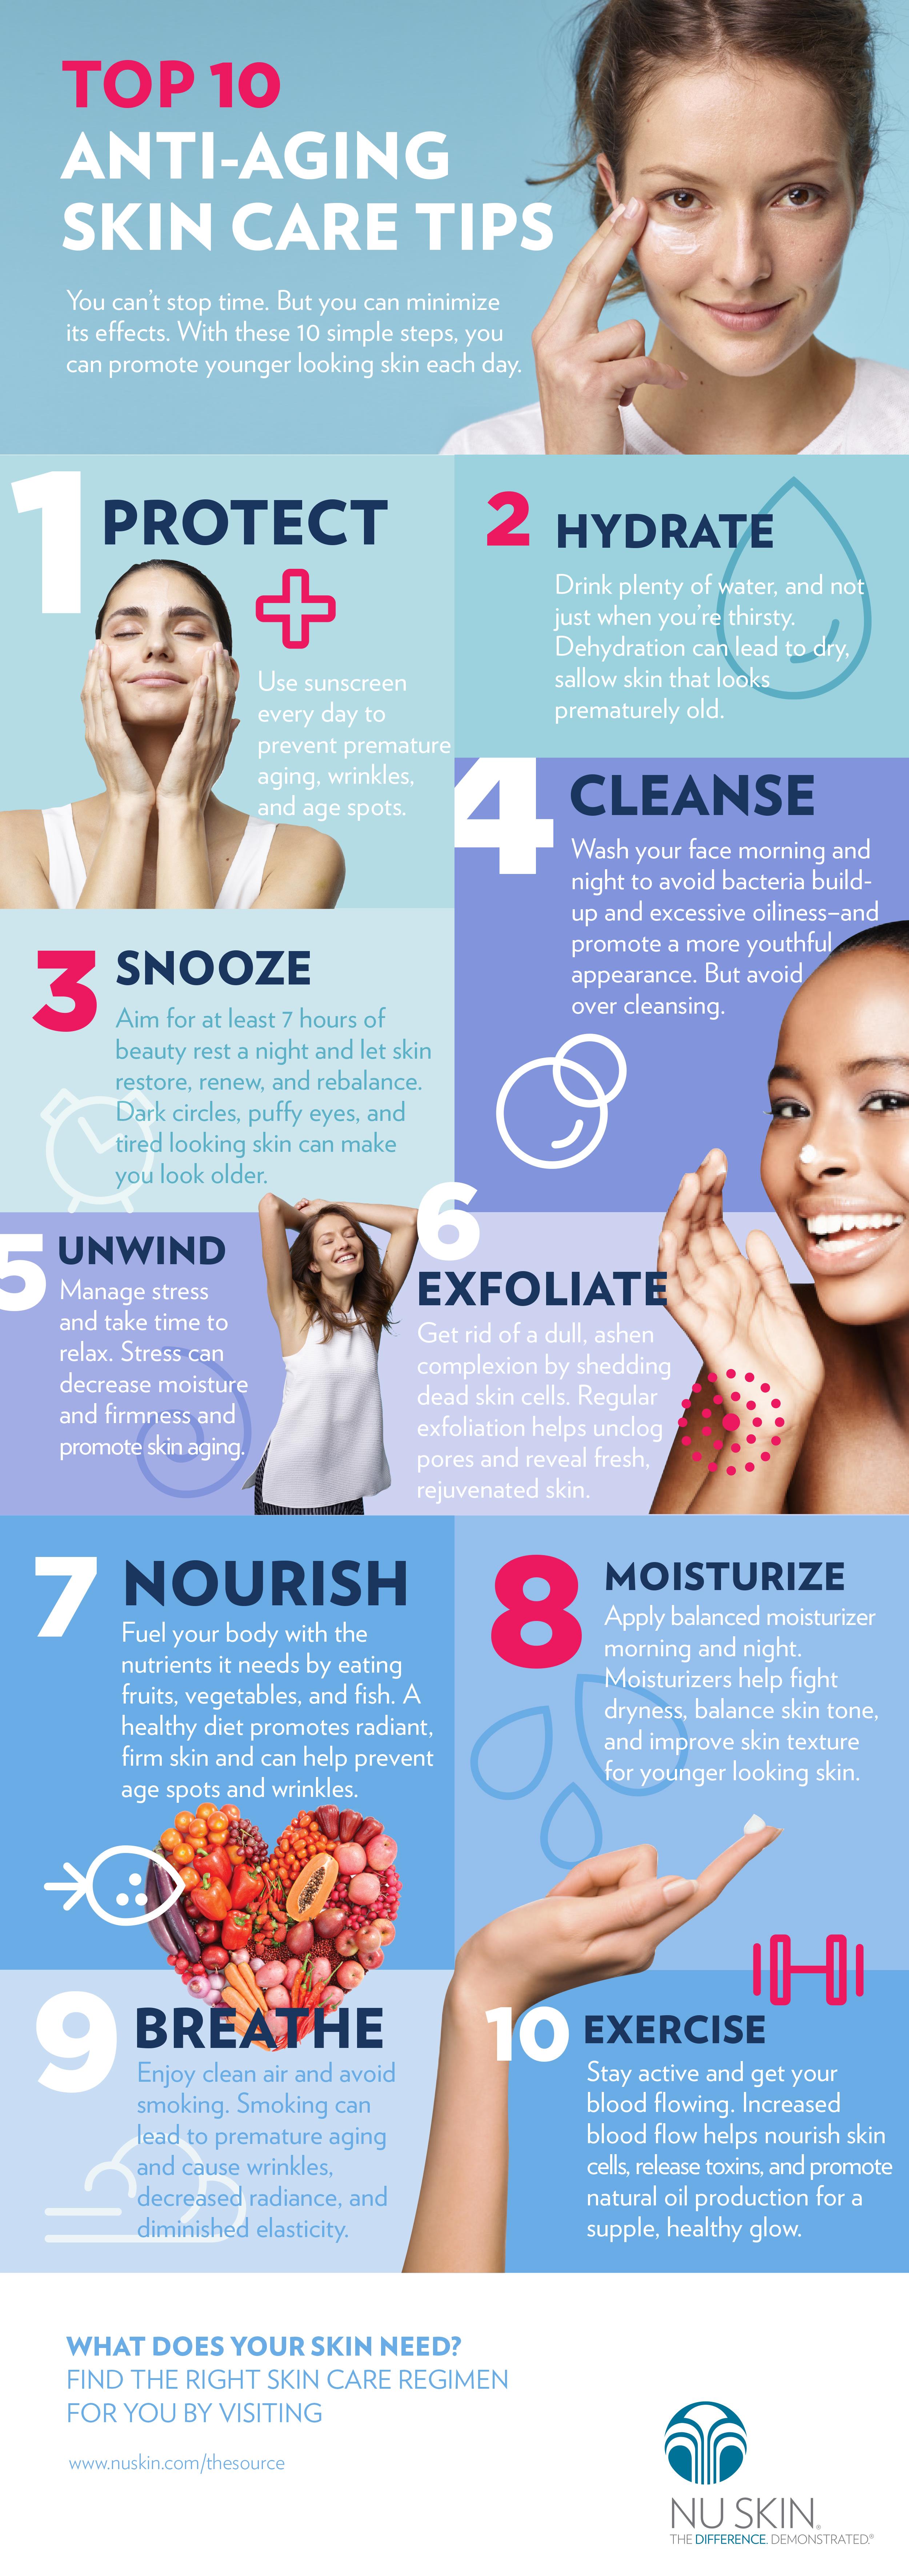 Tips For Using The Right Skincare Products To Prevent Premature Aging